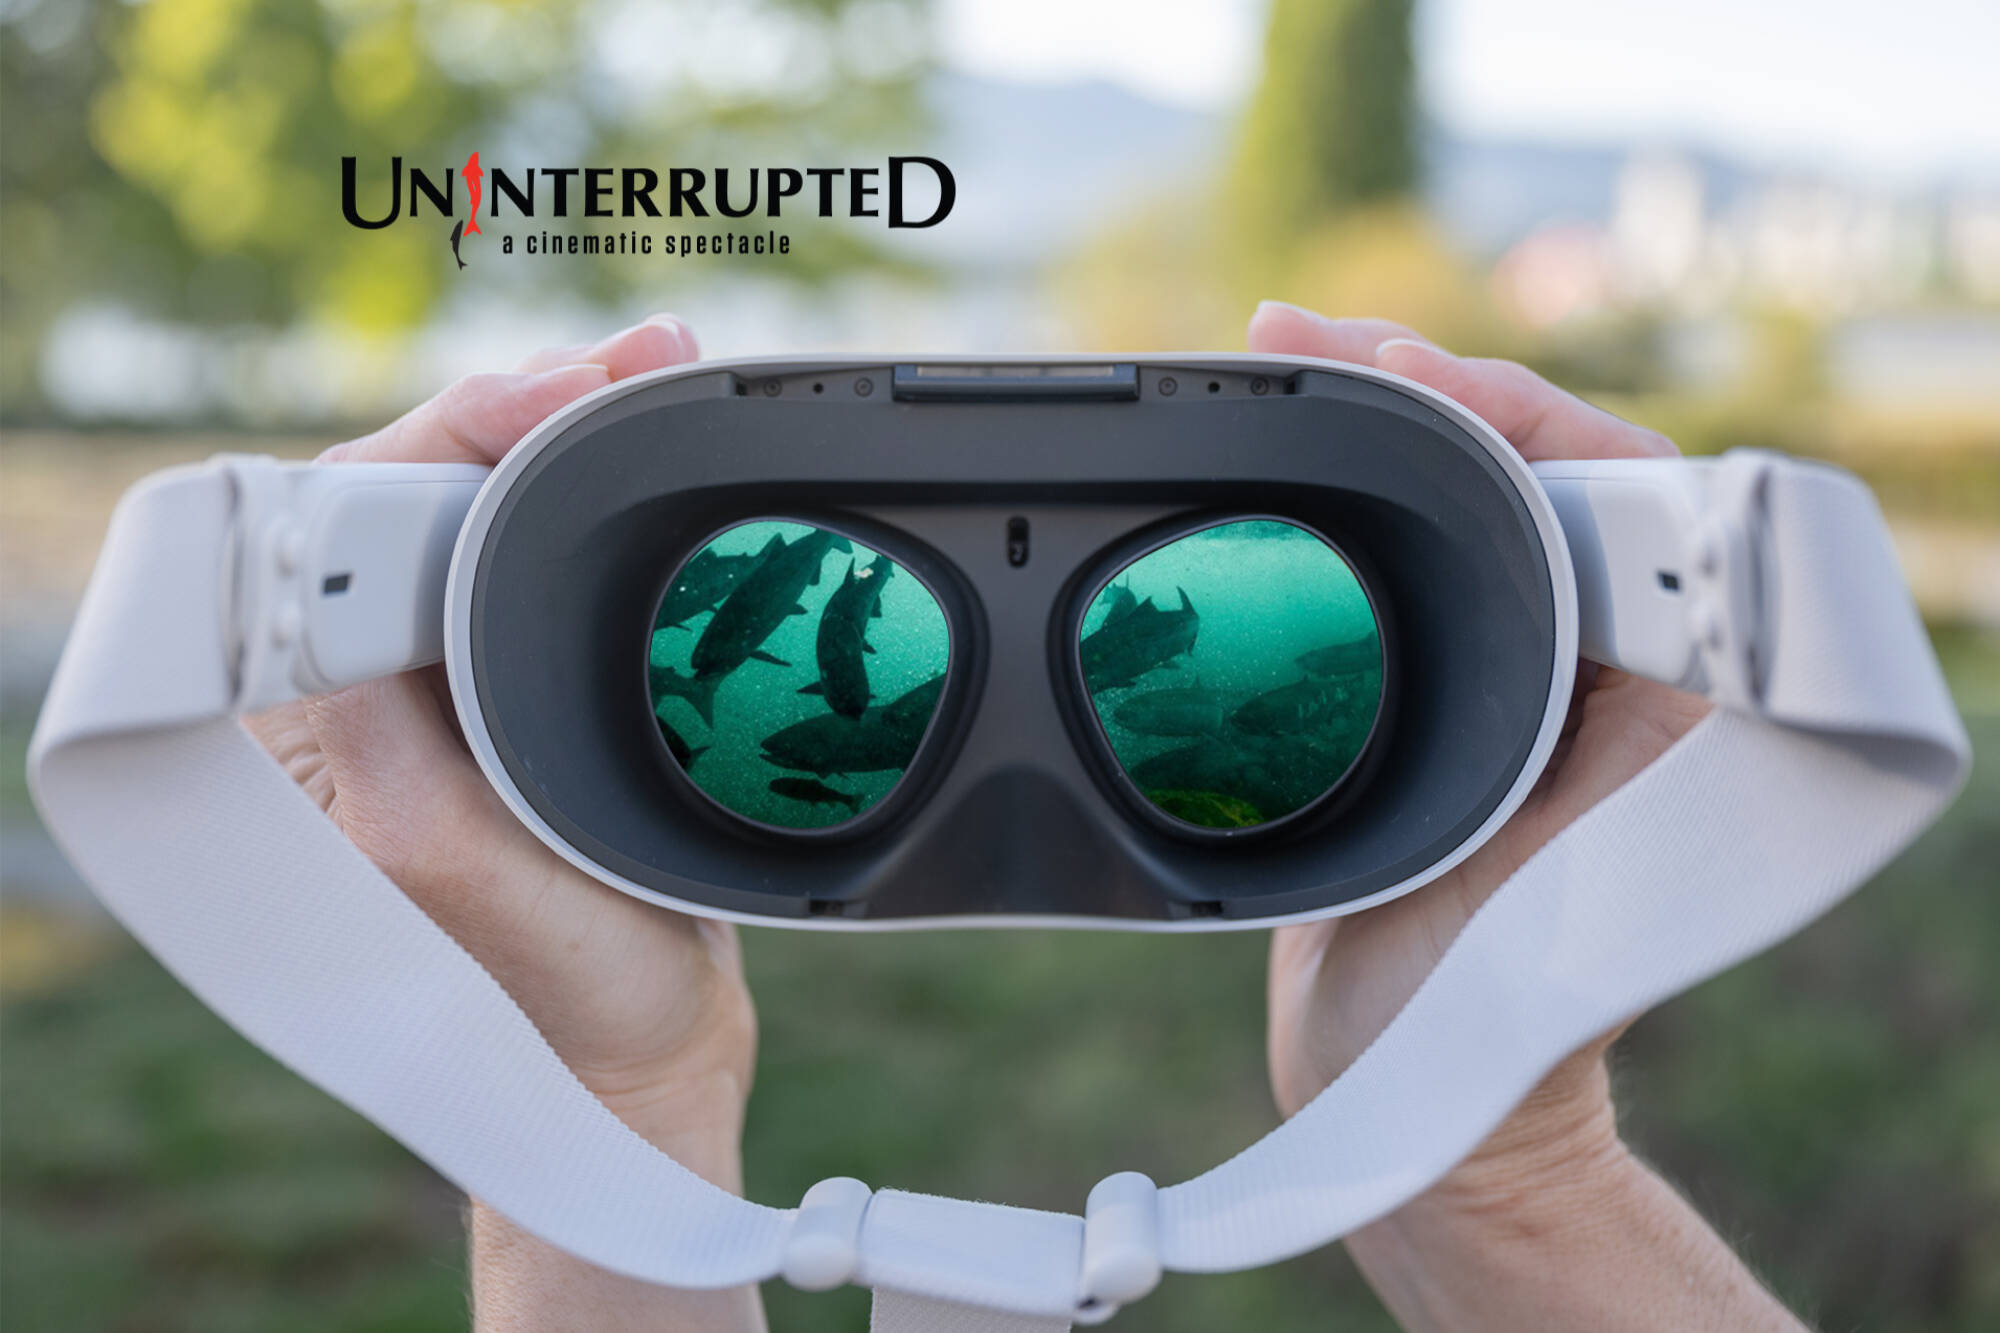 A pair of the goggles through which spectators can view UninterruptedVR when it comes to Quaaout Lodge in the North Shuswap on Oct. 26 and 27, then the Red Barn in Sicamous Oct. 28 and 29, Song Sparrow Hall in Salmon Arm Nov. 3-5, and lastly the Salmon Arm Art Gallery from Nov. 8 to Dec. 10. (Canada Wild Productions image)